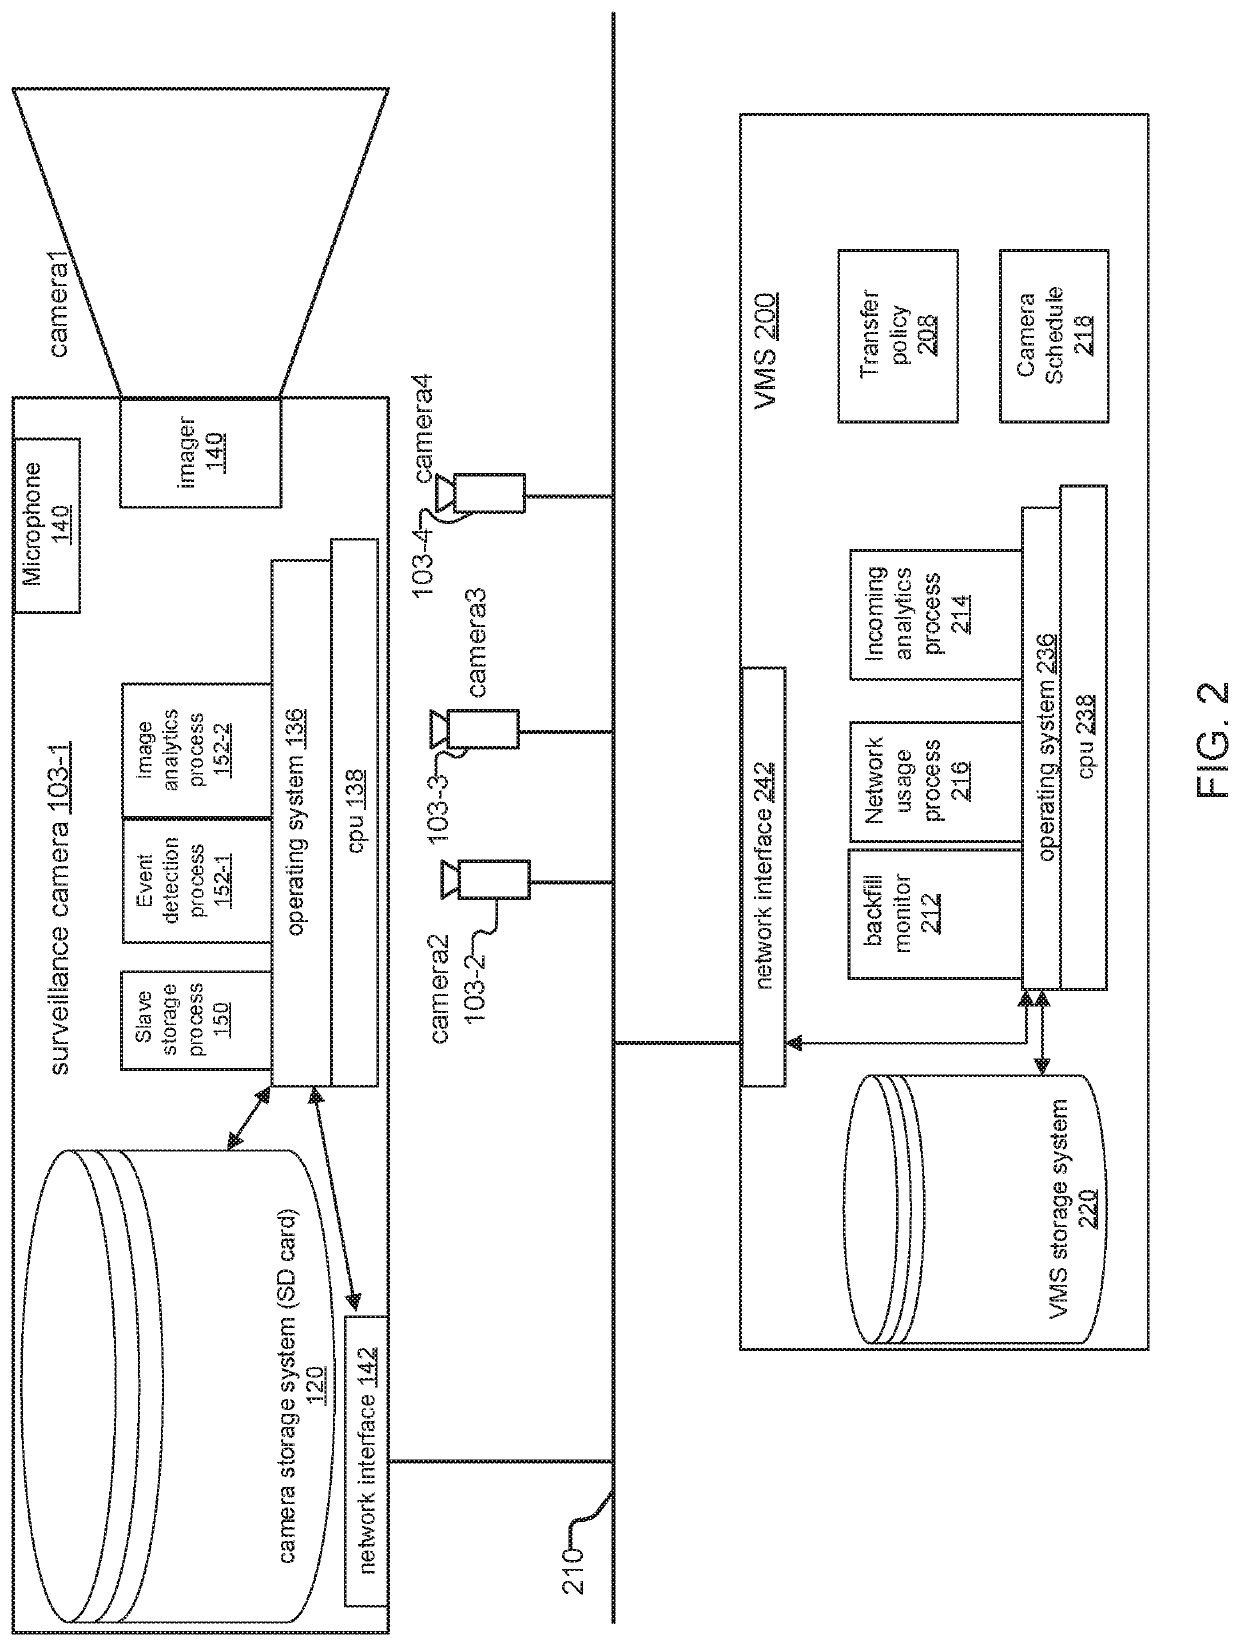 Video management system and method for retrieving and storing data from surveillance cameras